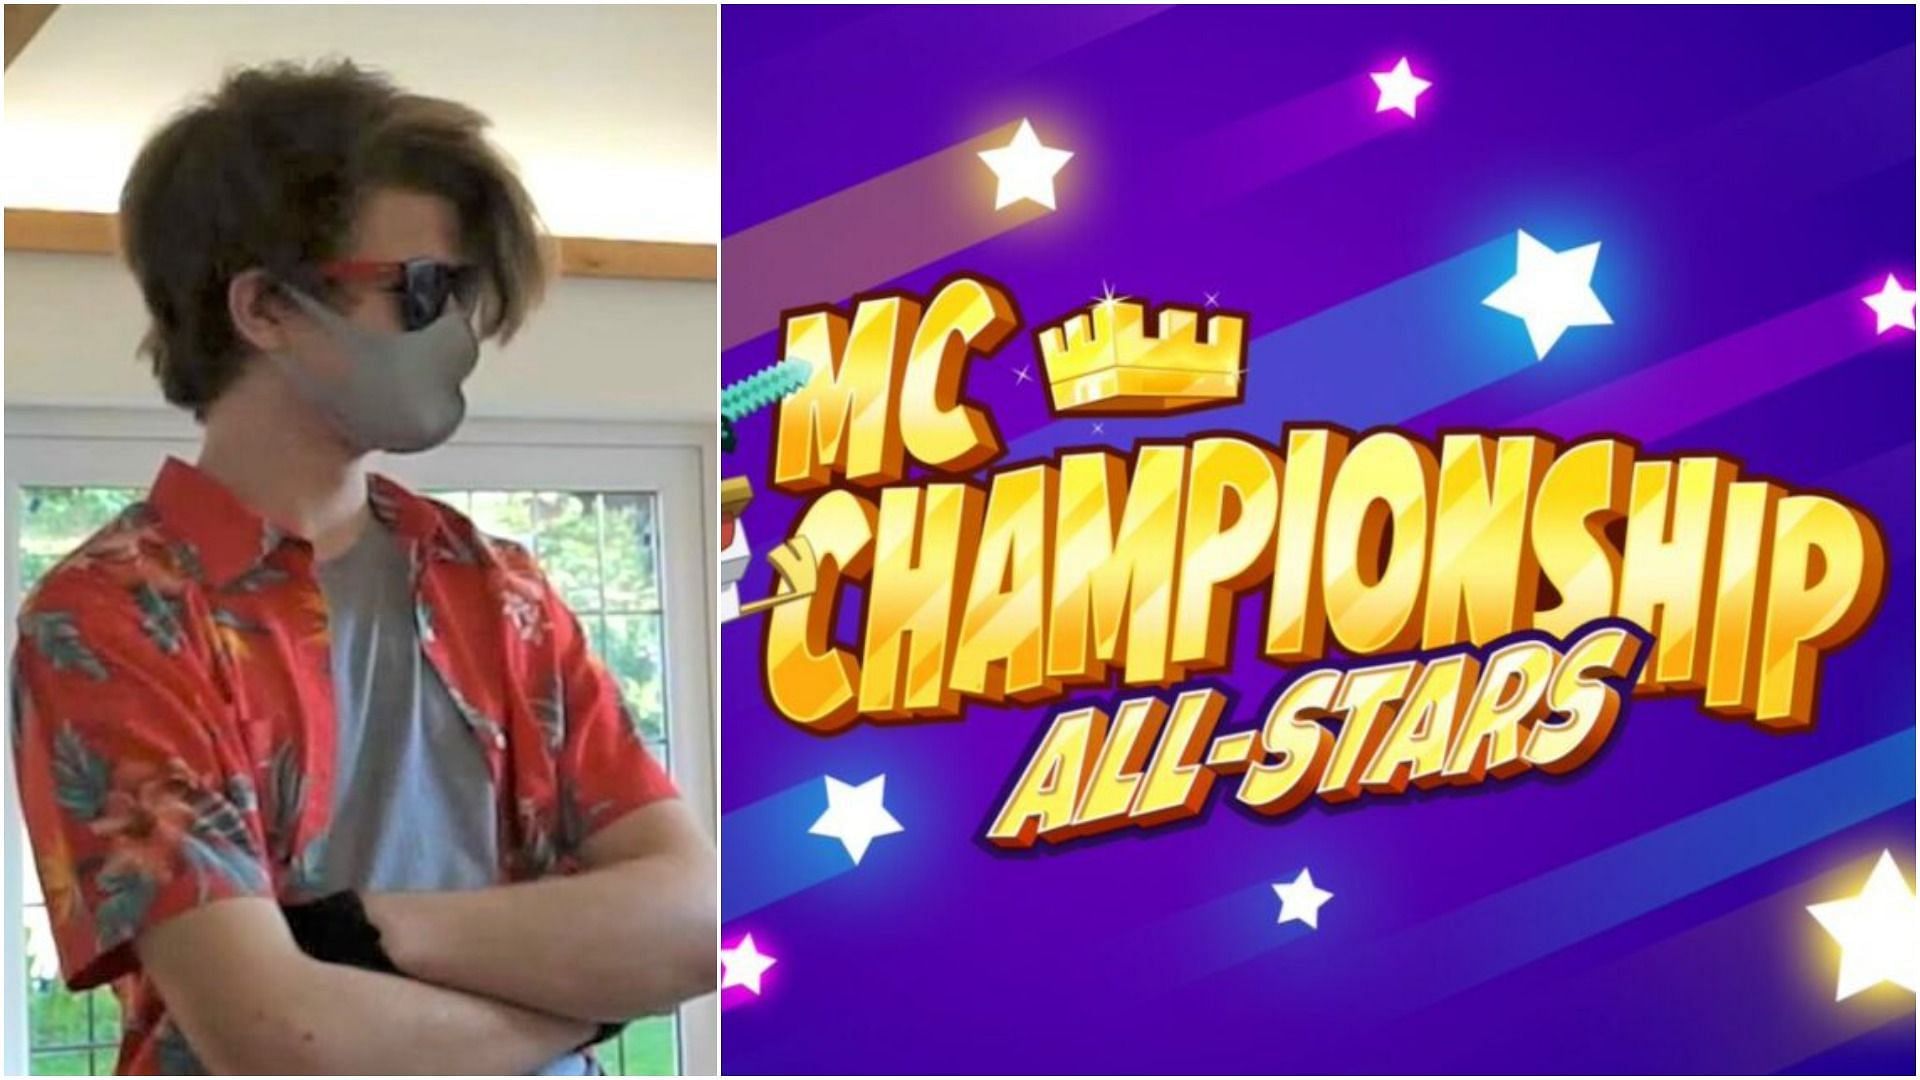 Ranboo reacts to announcement from MCC All-stars (Image via Twitter)